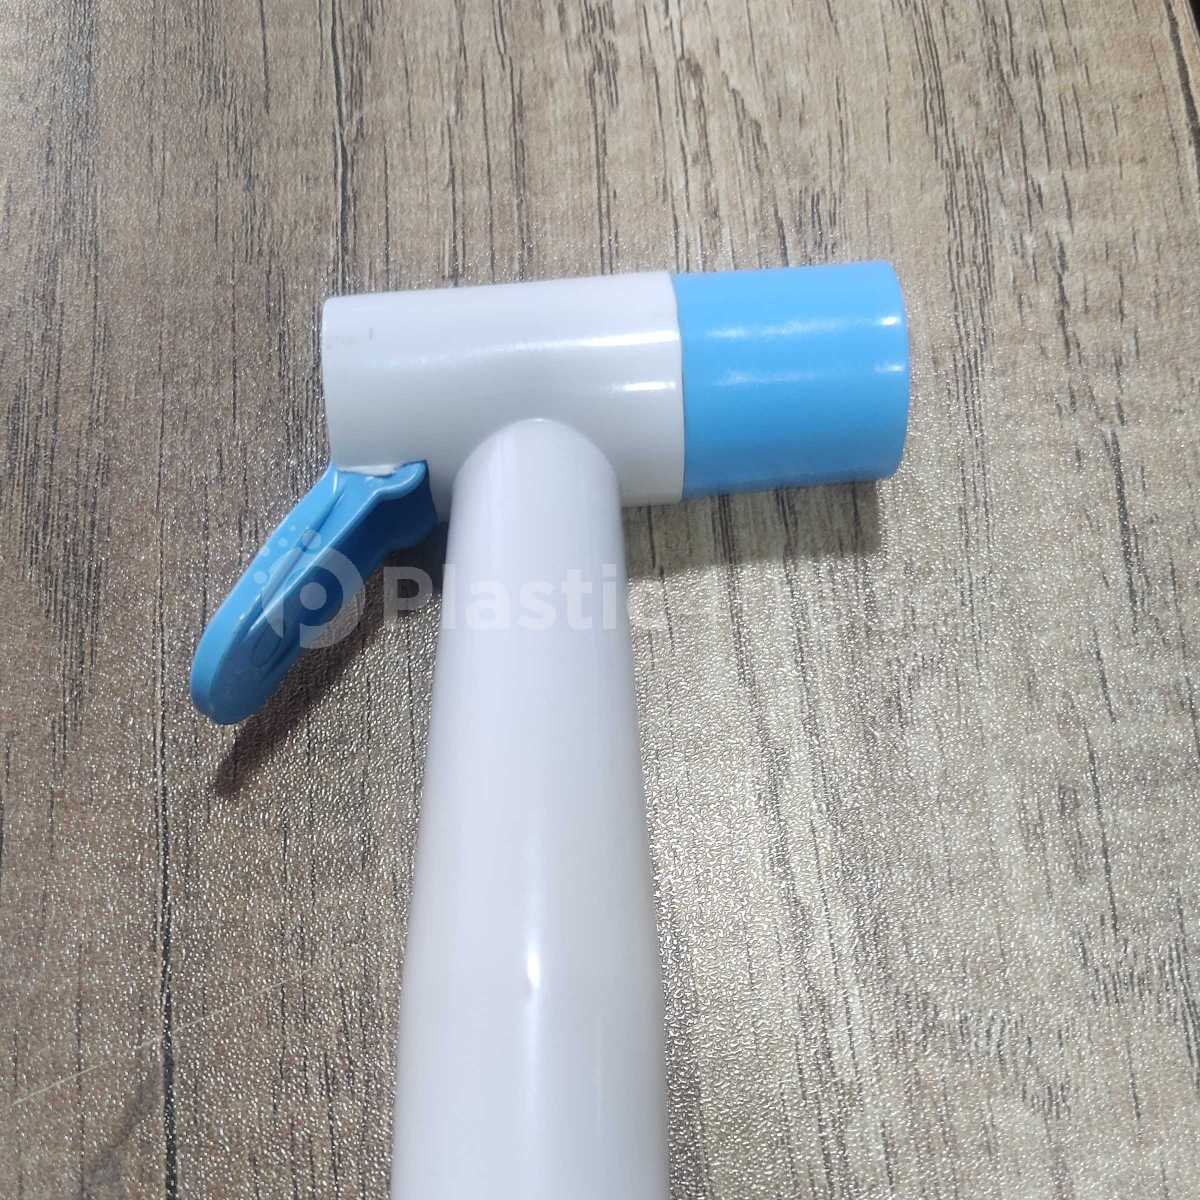 PIPES, FAUCETS, BIB COCKS PTMT Prime/Virgin Injection Molding gujarat india Plastic4trade